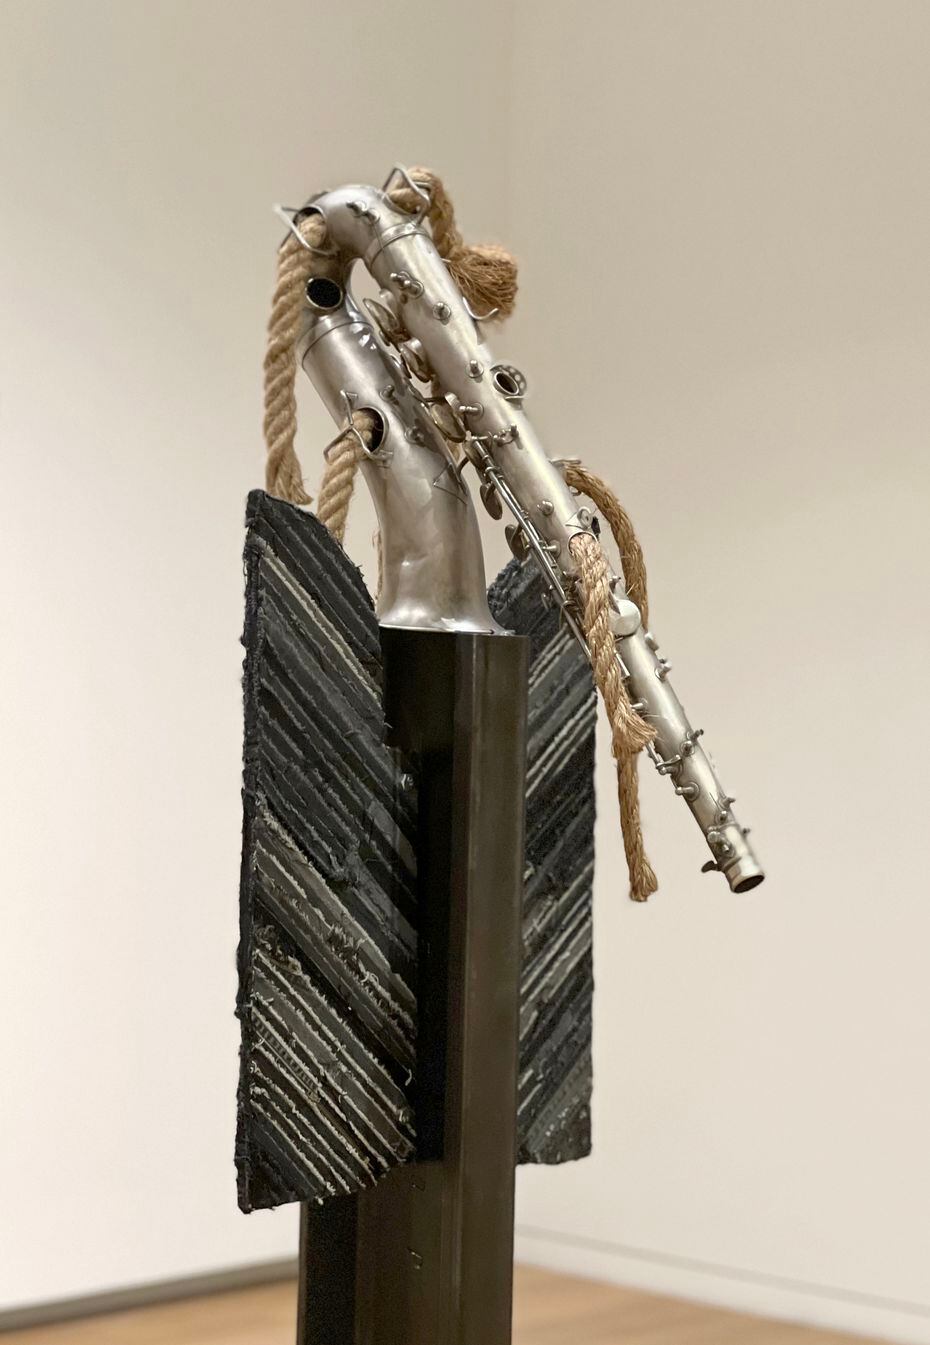 Jamal Cyrus' "Horn Beam Effigy" is a totemic construction topped by an inverted saxophone,...